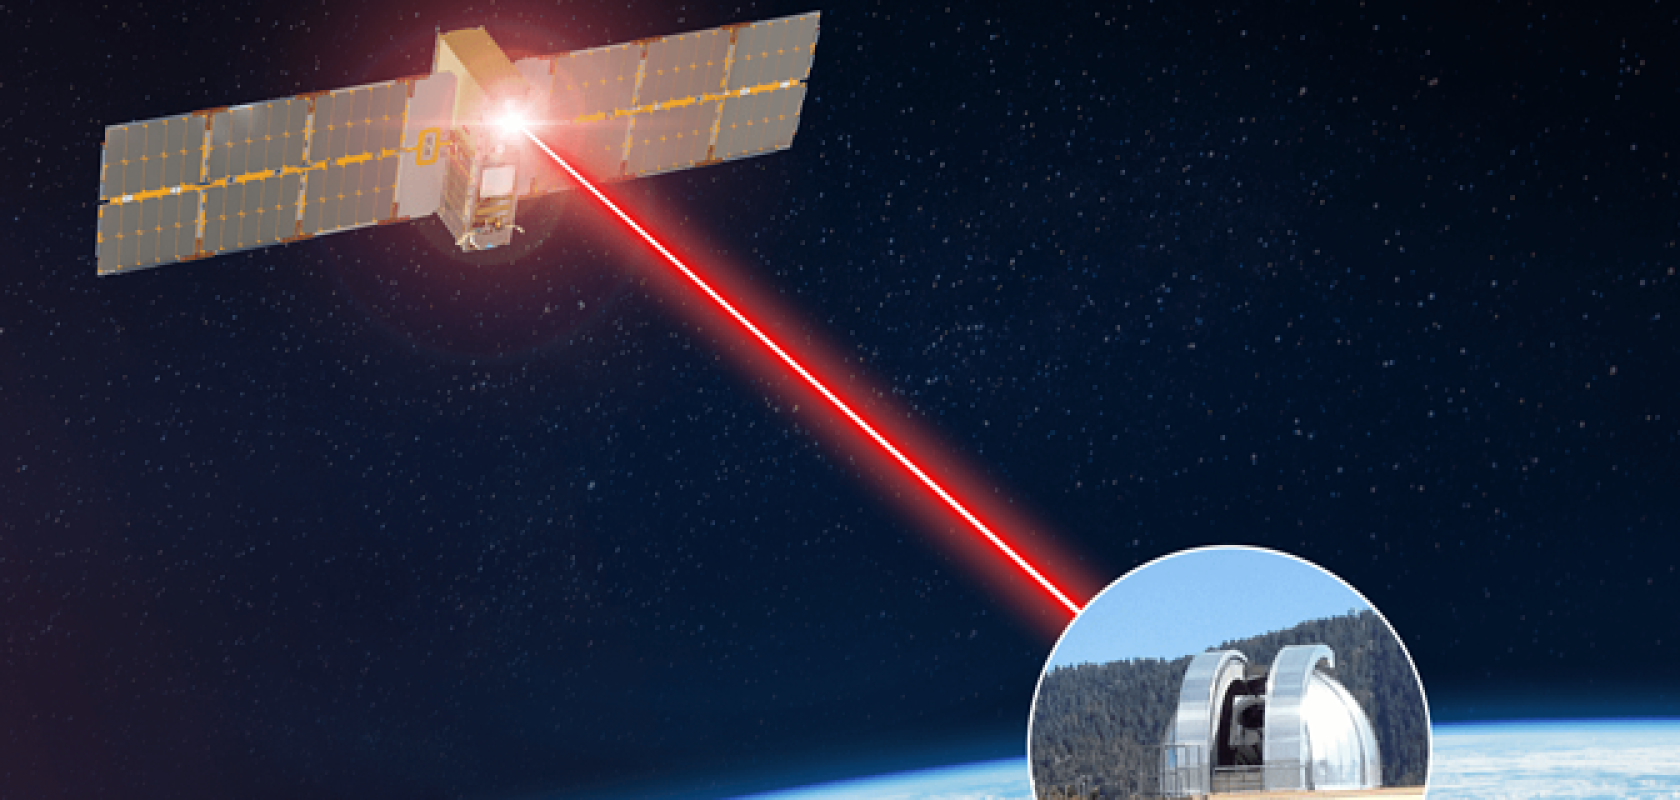 Laser communications hold more information than conventional radio systems, which could help scientists make more discoveries (Image: NASA)